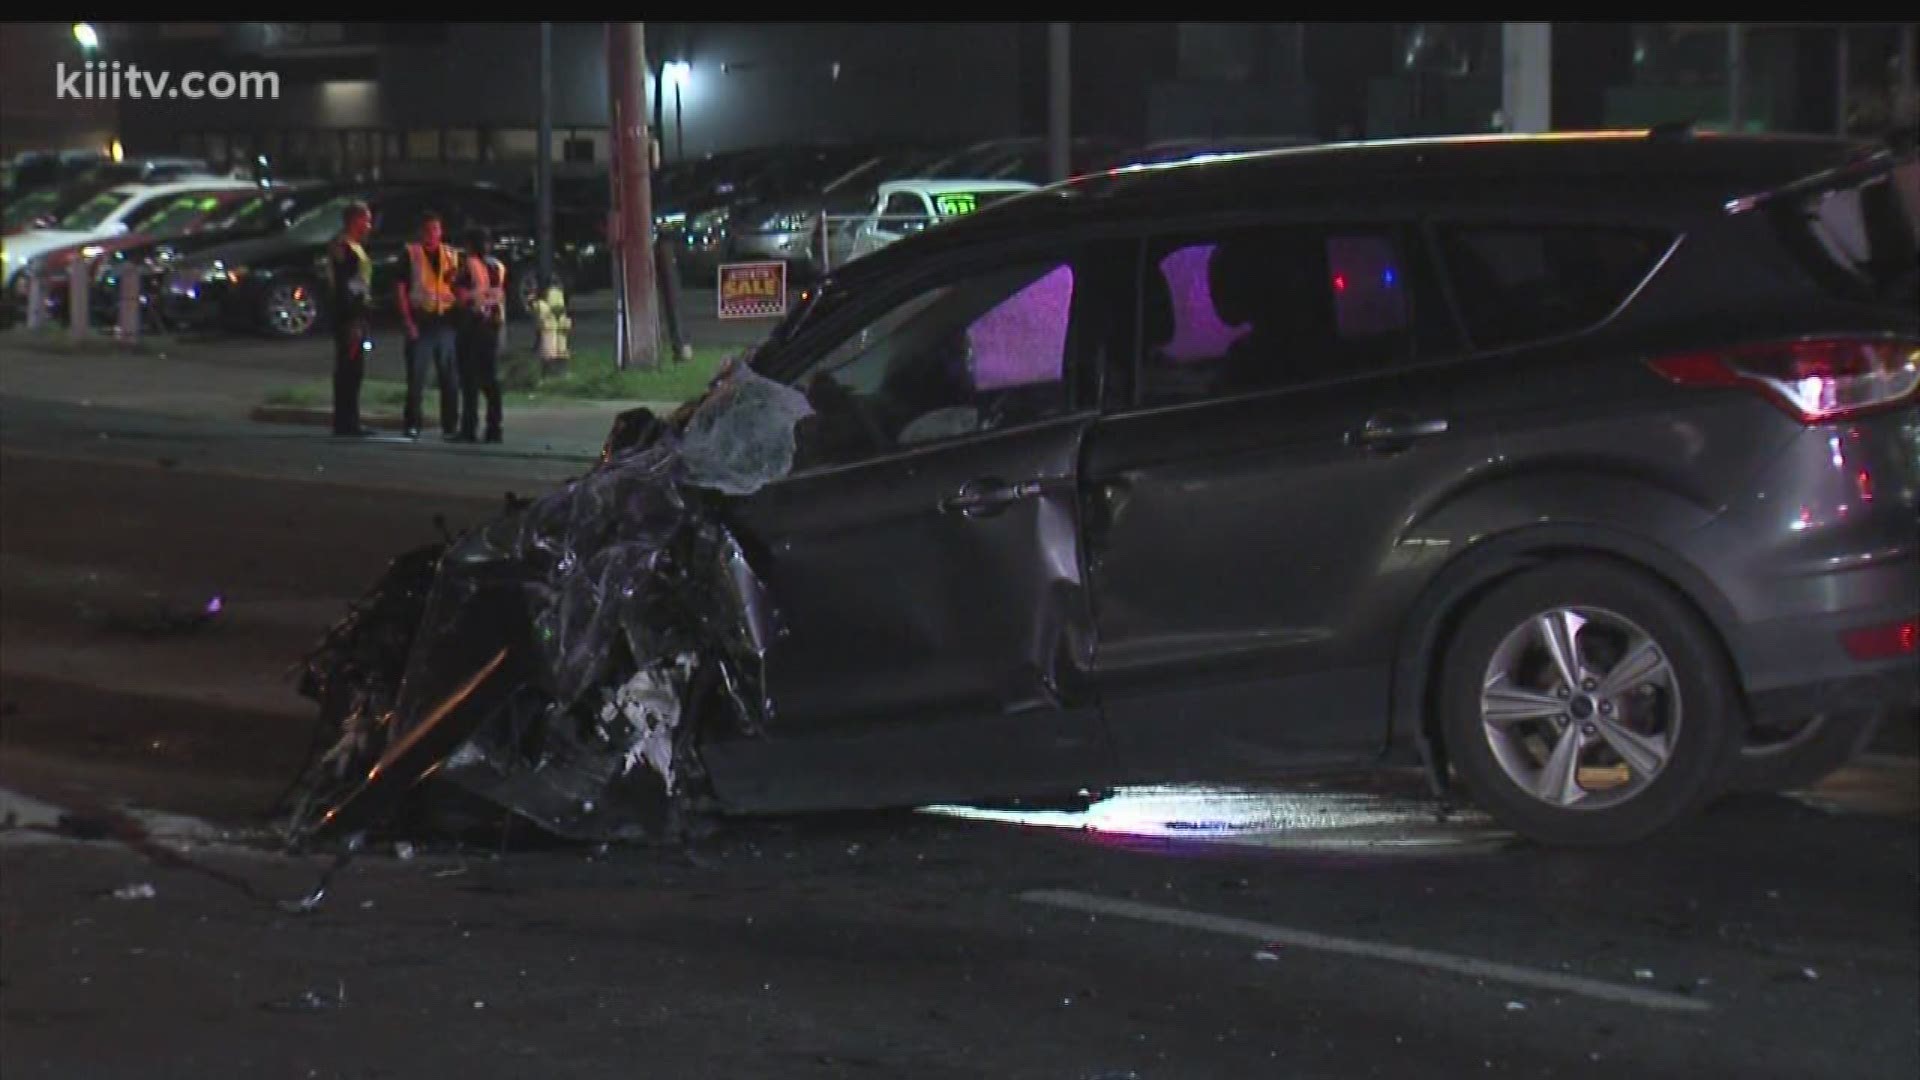 Police are investigating an accident that happened Sunday morning about 2:30 a.m. at Everhart and Holly.